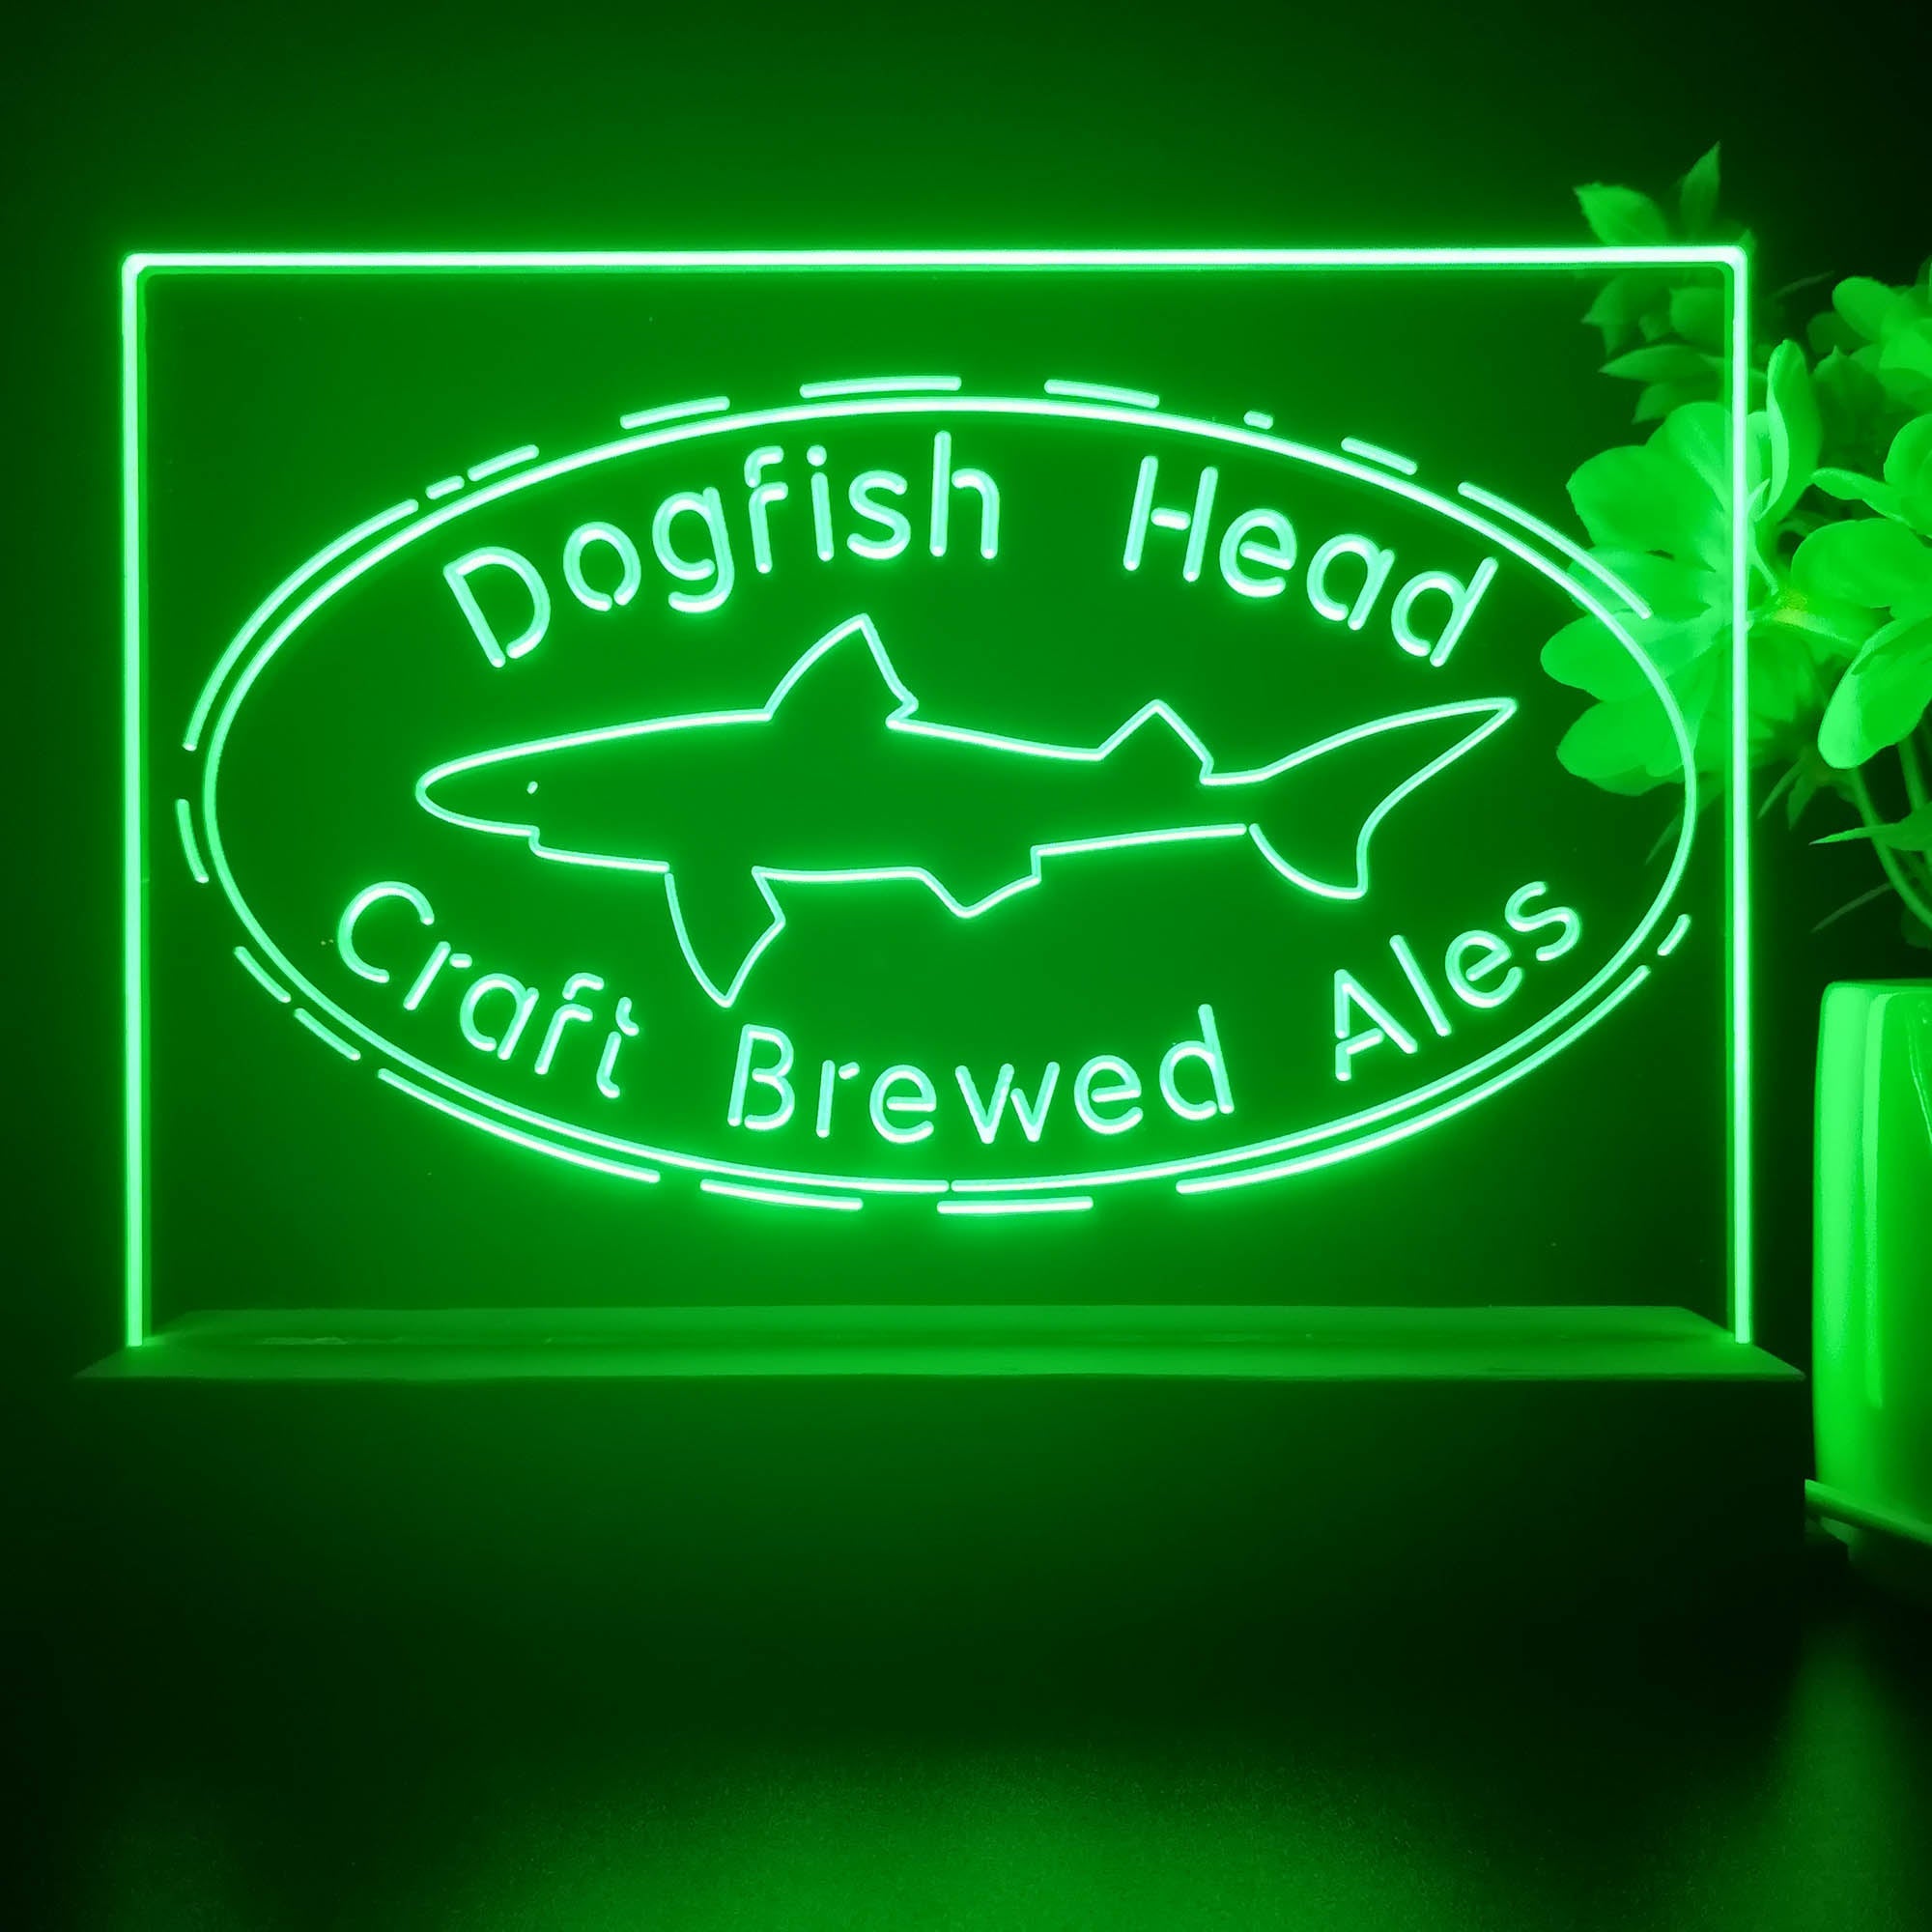 Dogfishs Heads Craft Brewery Neon Sign Pub Bar Decor Lamp